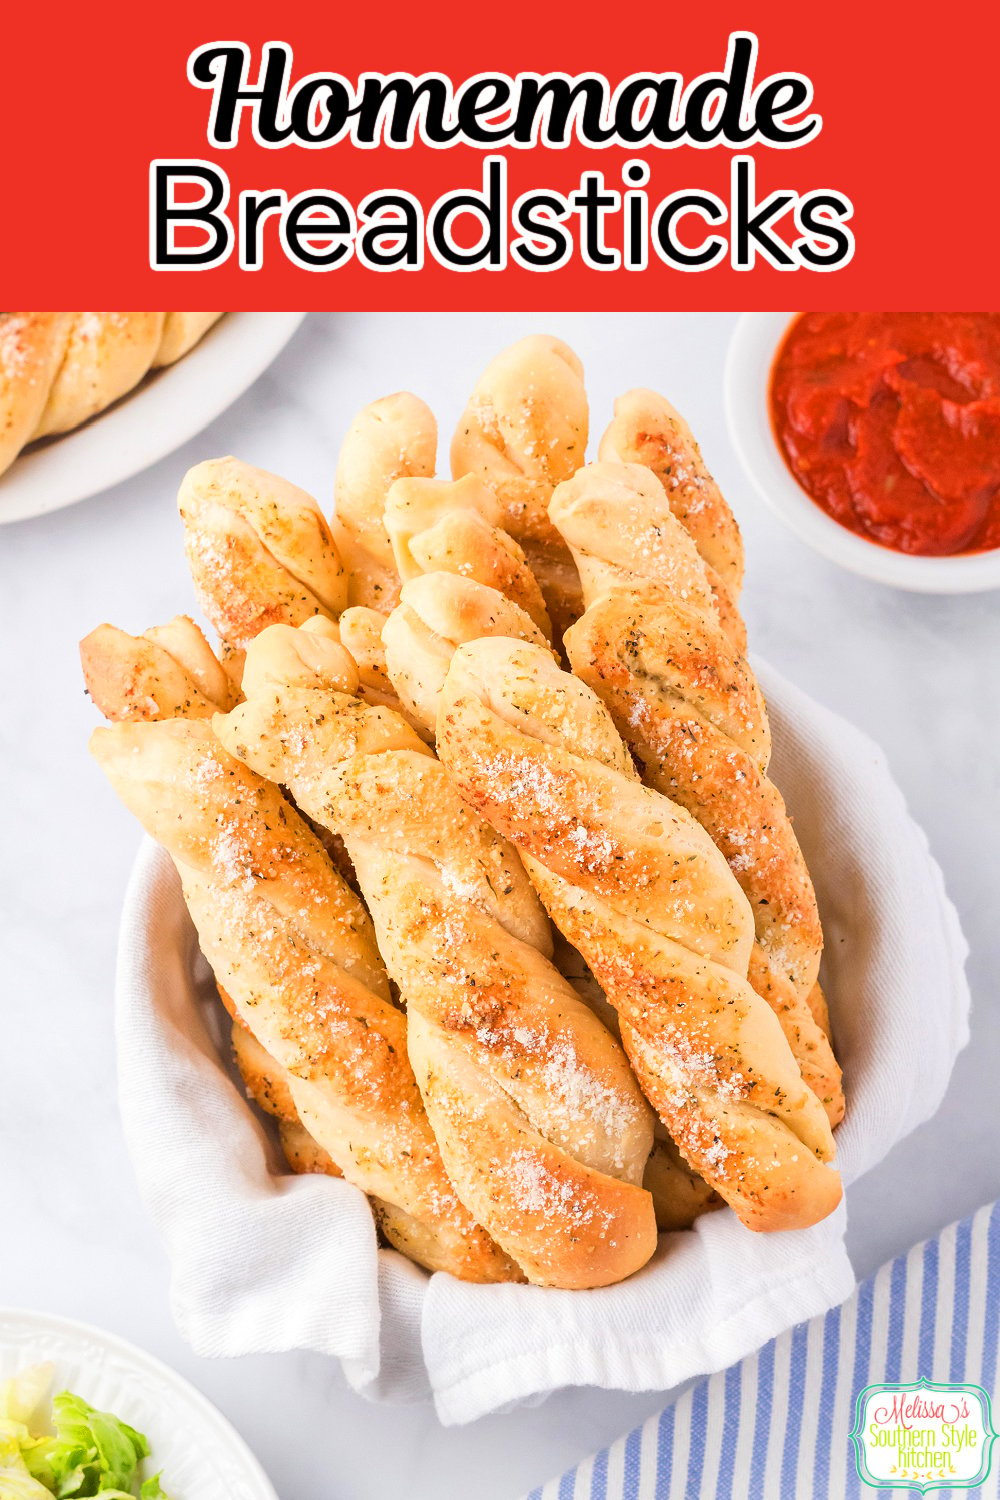 These buttery twisted Homemade Breadsticks are deliciously seasoned making them ideal for serving as an appetizer or a side dish #breadsticks #homemadebread #sourdoughbread #breadsticksrecipe #Italianbread #Italianbreadsticks #easybreadsticksrecipe